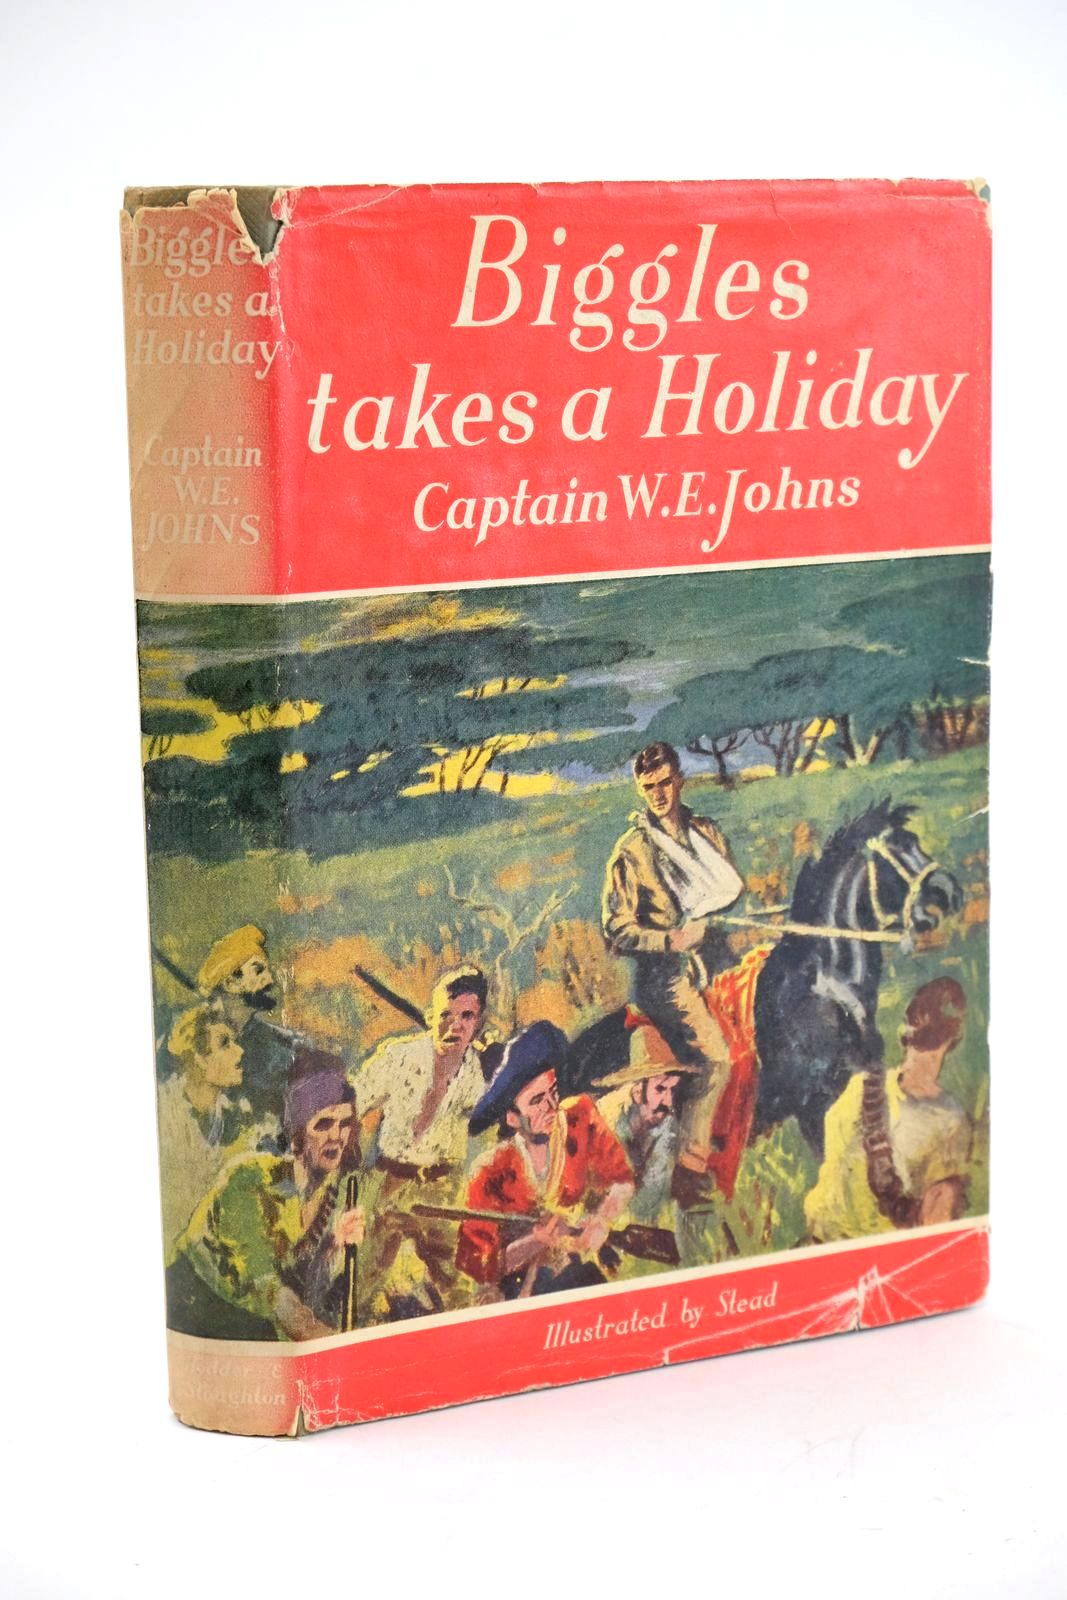 Photo of BIGGLES TAKES A HOLIDAY written by Johns, W.E. illustrated by Stead,  published by Hodder & Stoughton (STOCK CODE: 1324031)  for sale by Stella & Rose's Books